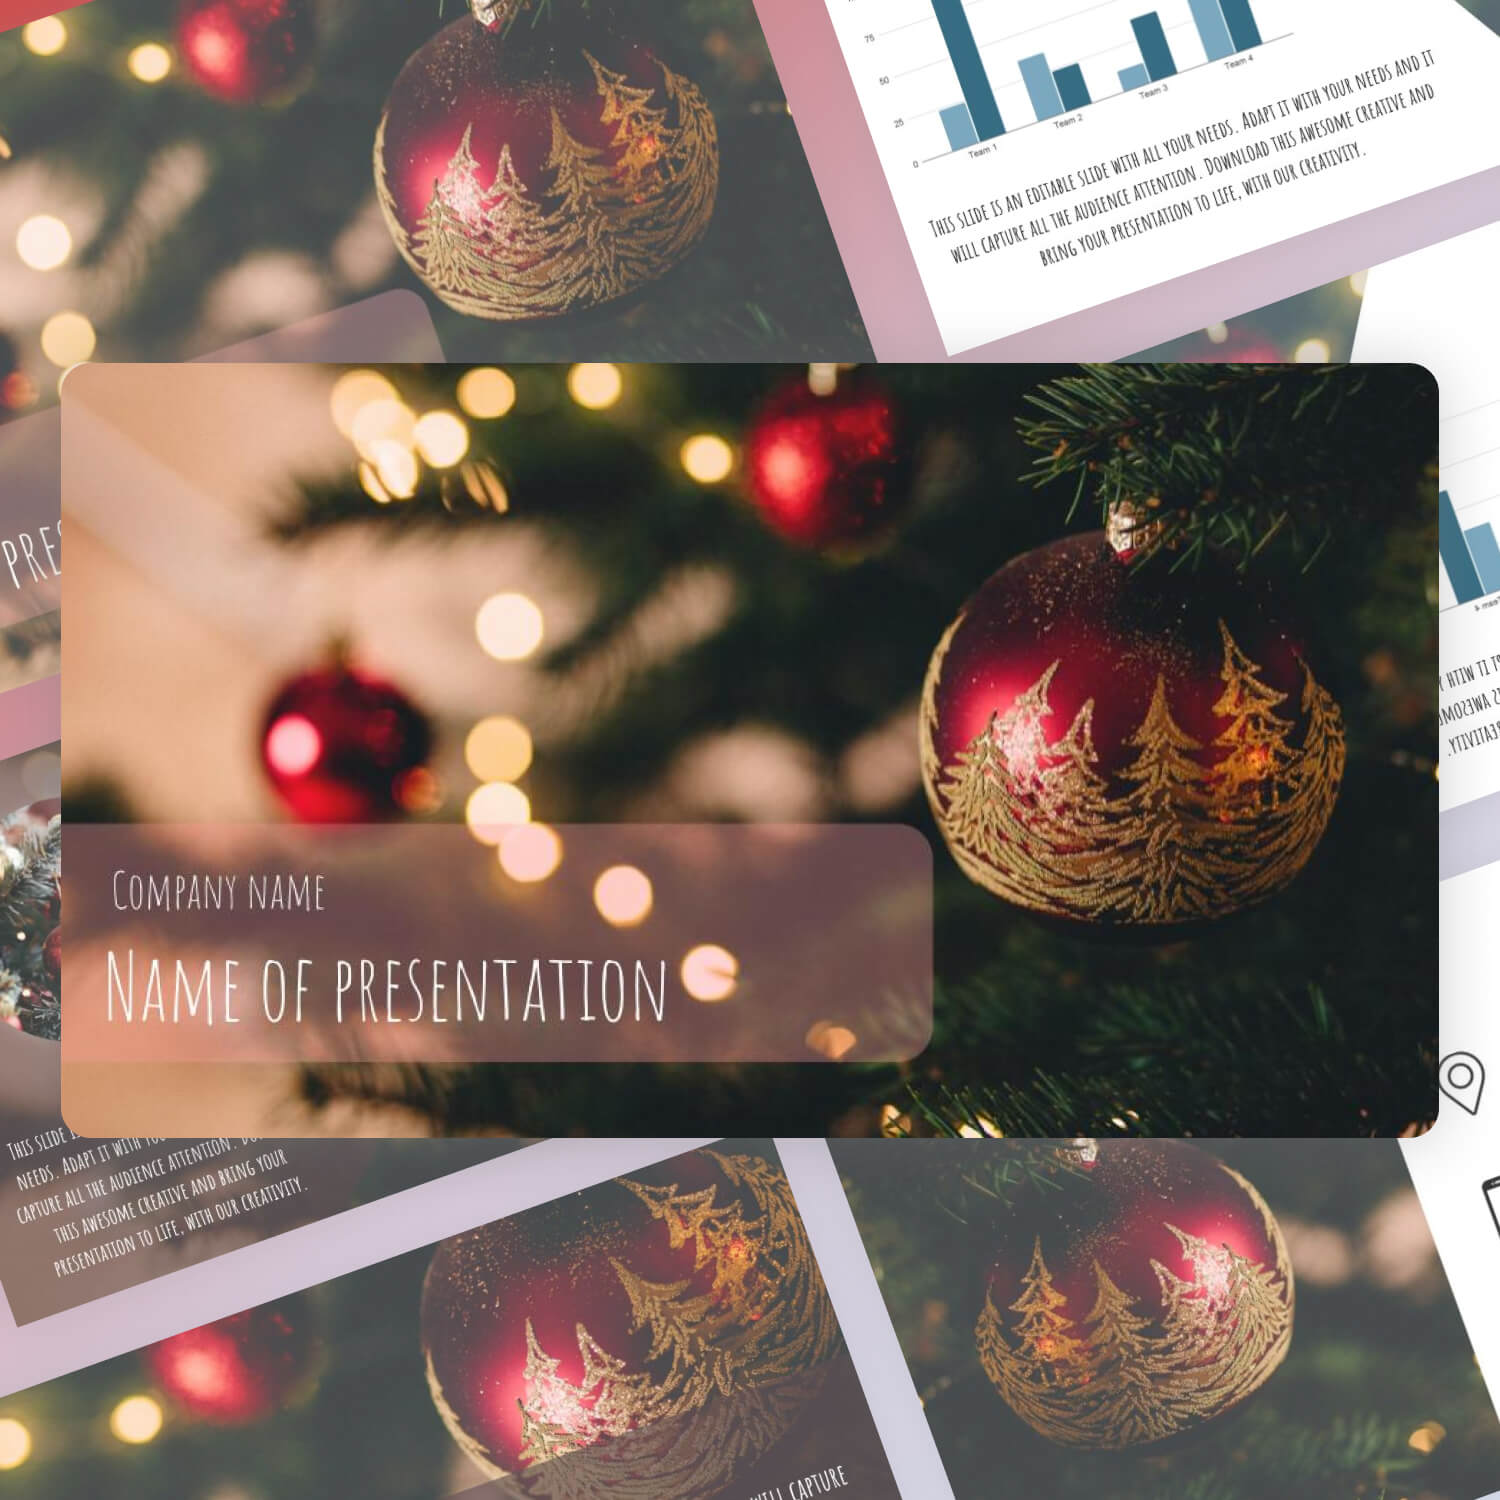 Free Christmas Eve Powerpoint Backgrounds.